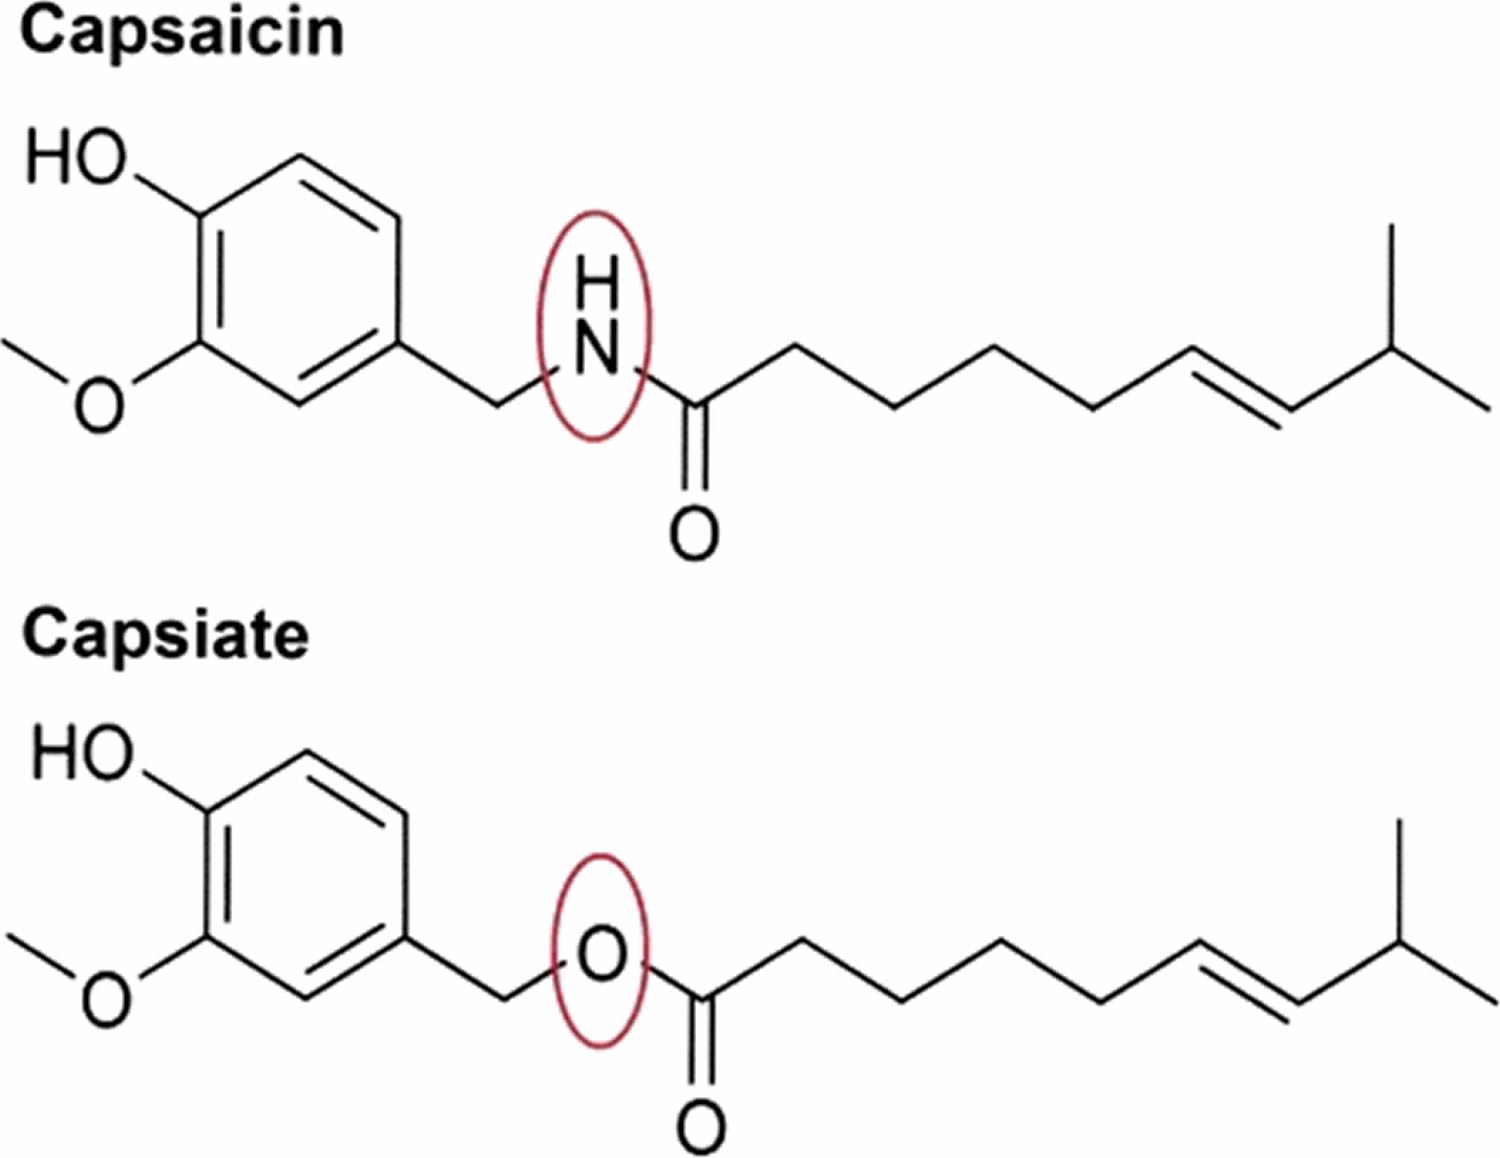 Chemical structures of capsaicin and capsiate